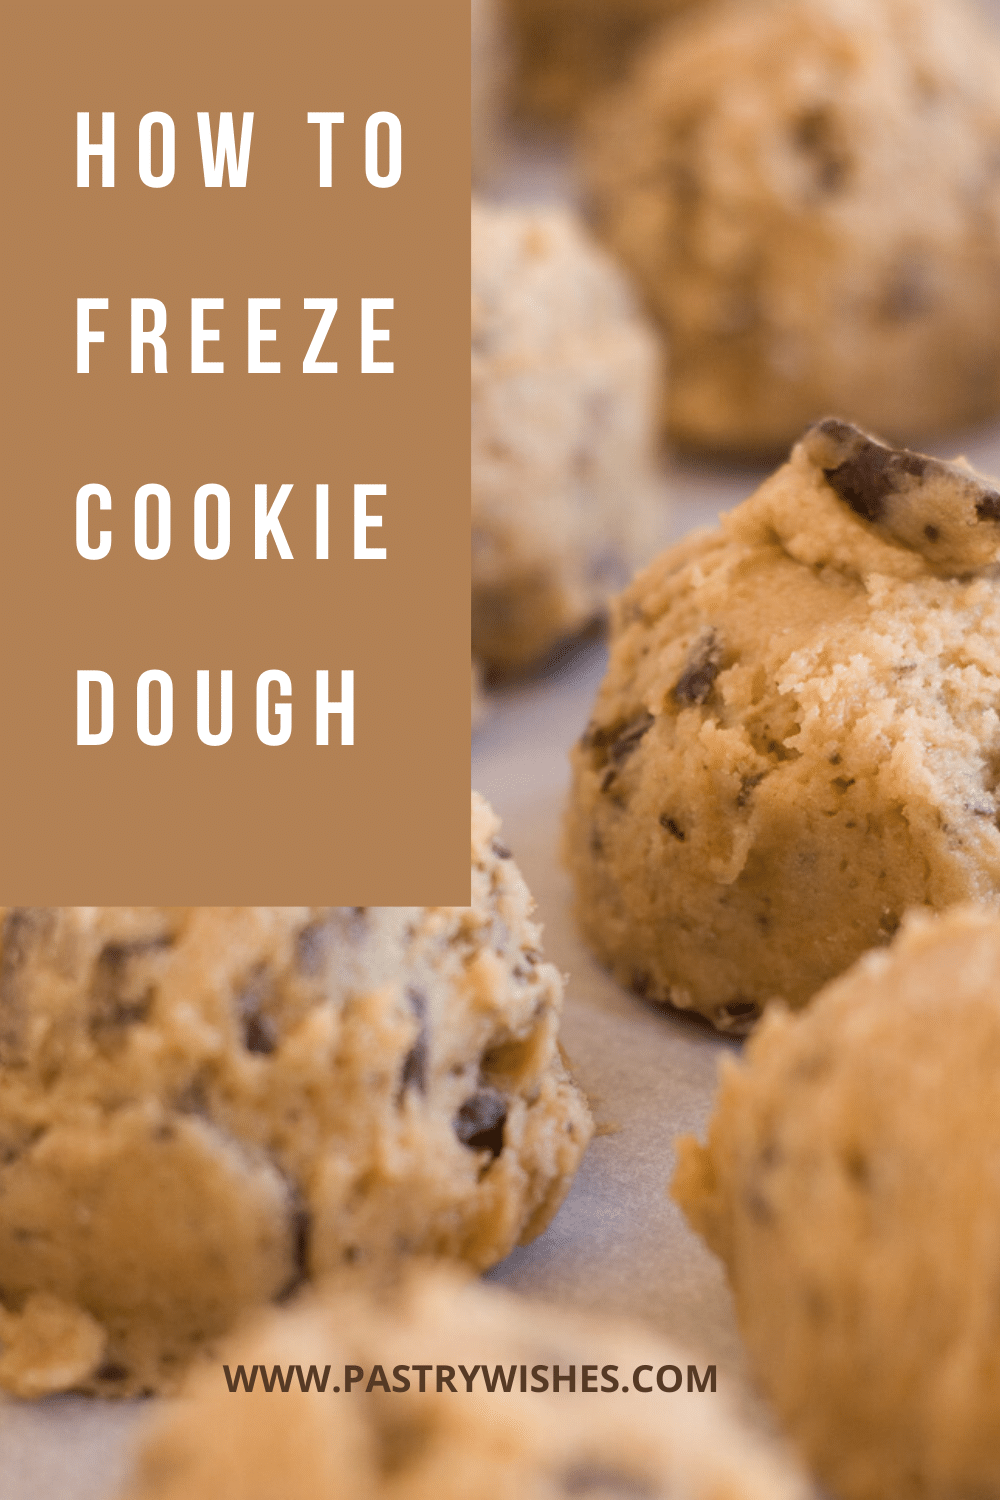 HOW TO FREEZE COOKIE DOUGH